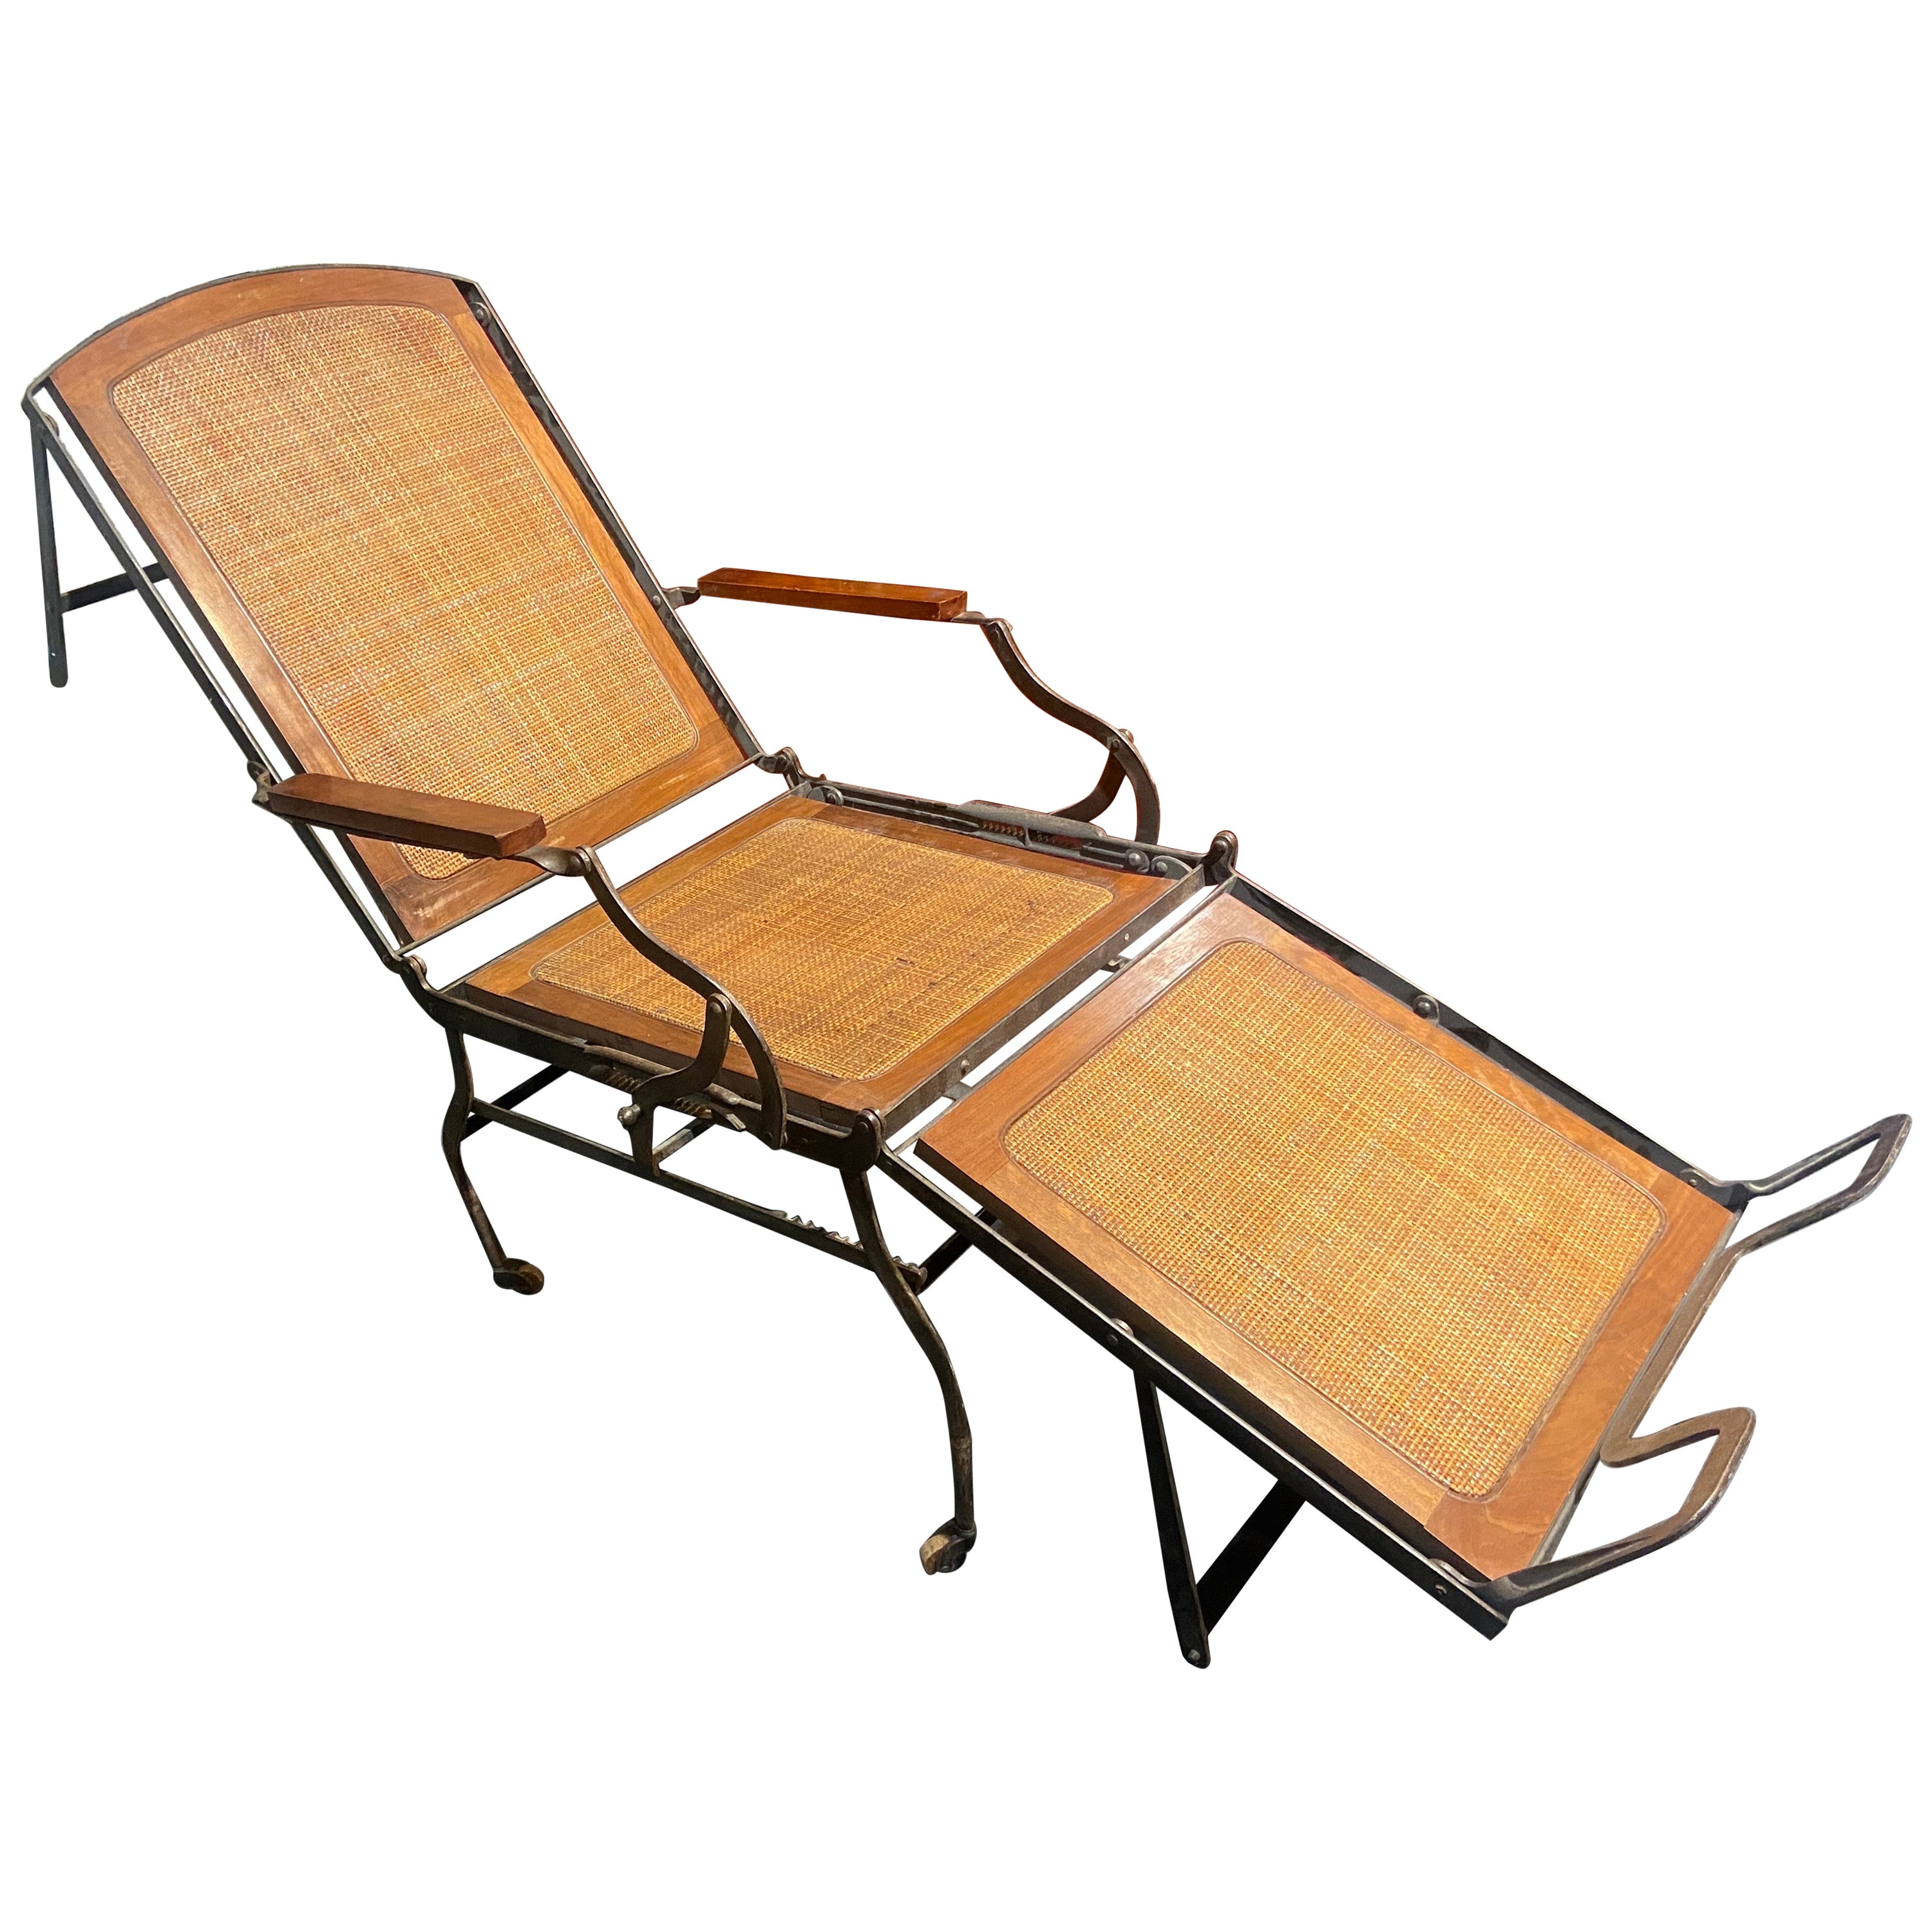 19th Century French Foldable Adjustable Iron Chaise Lounge in Cane and Wood For Sale